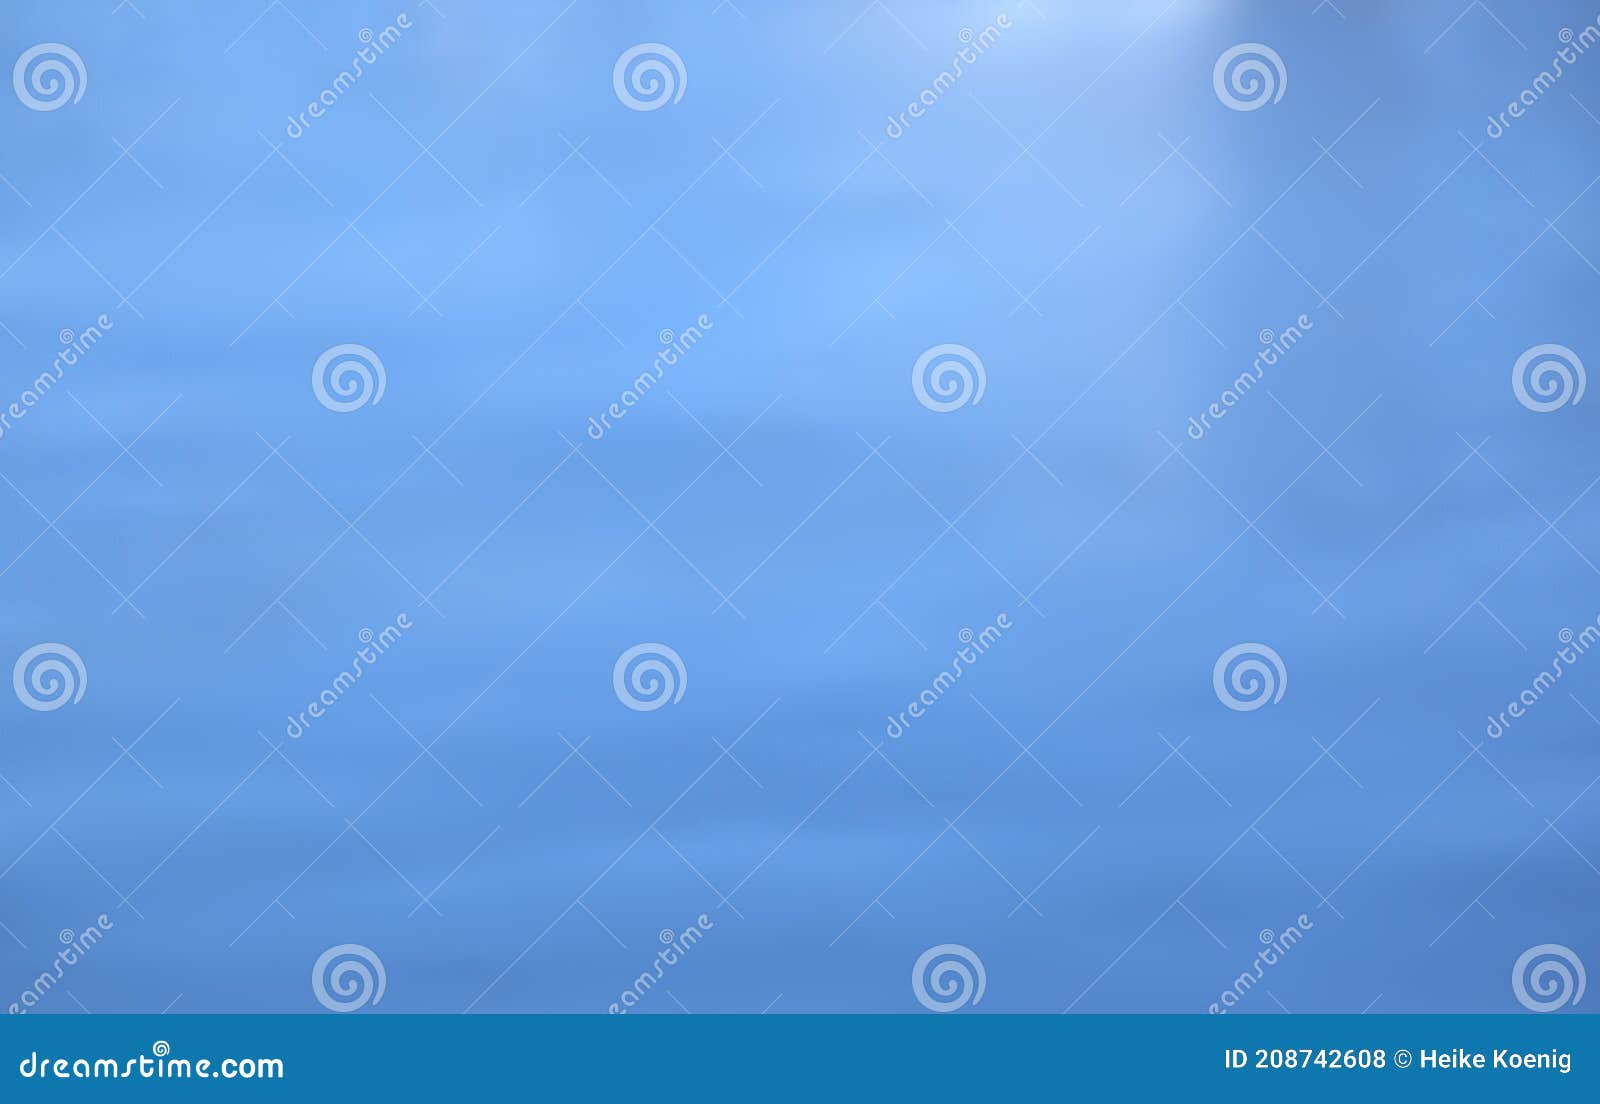 blurred and diffused blueish background